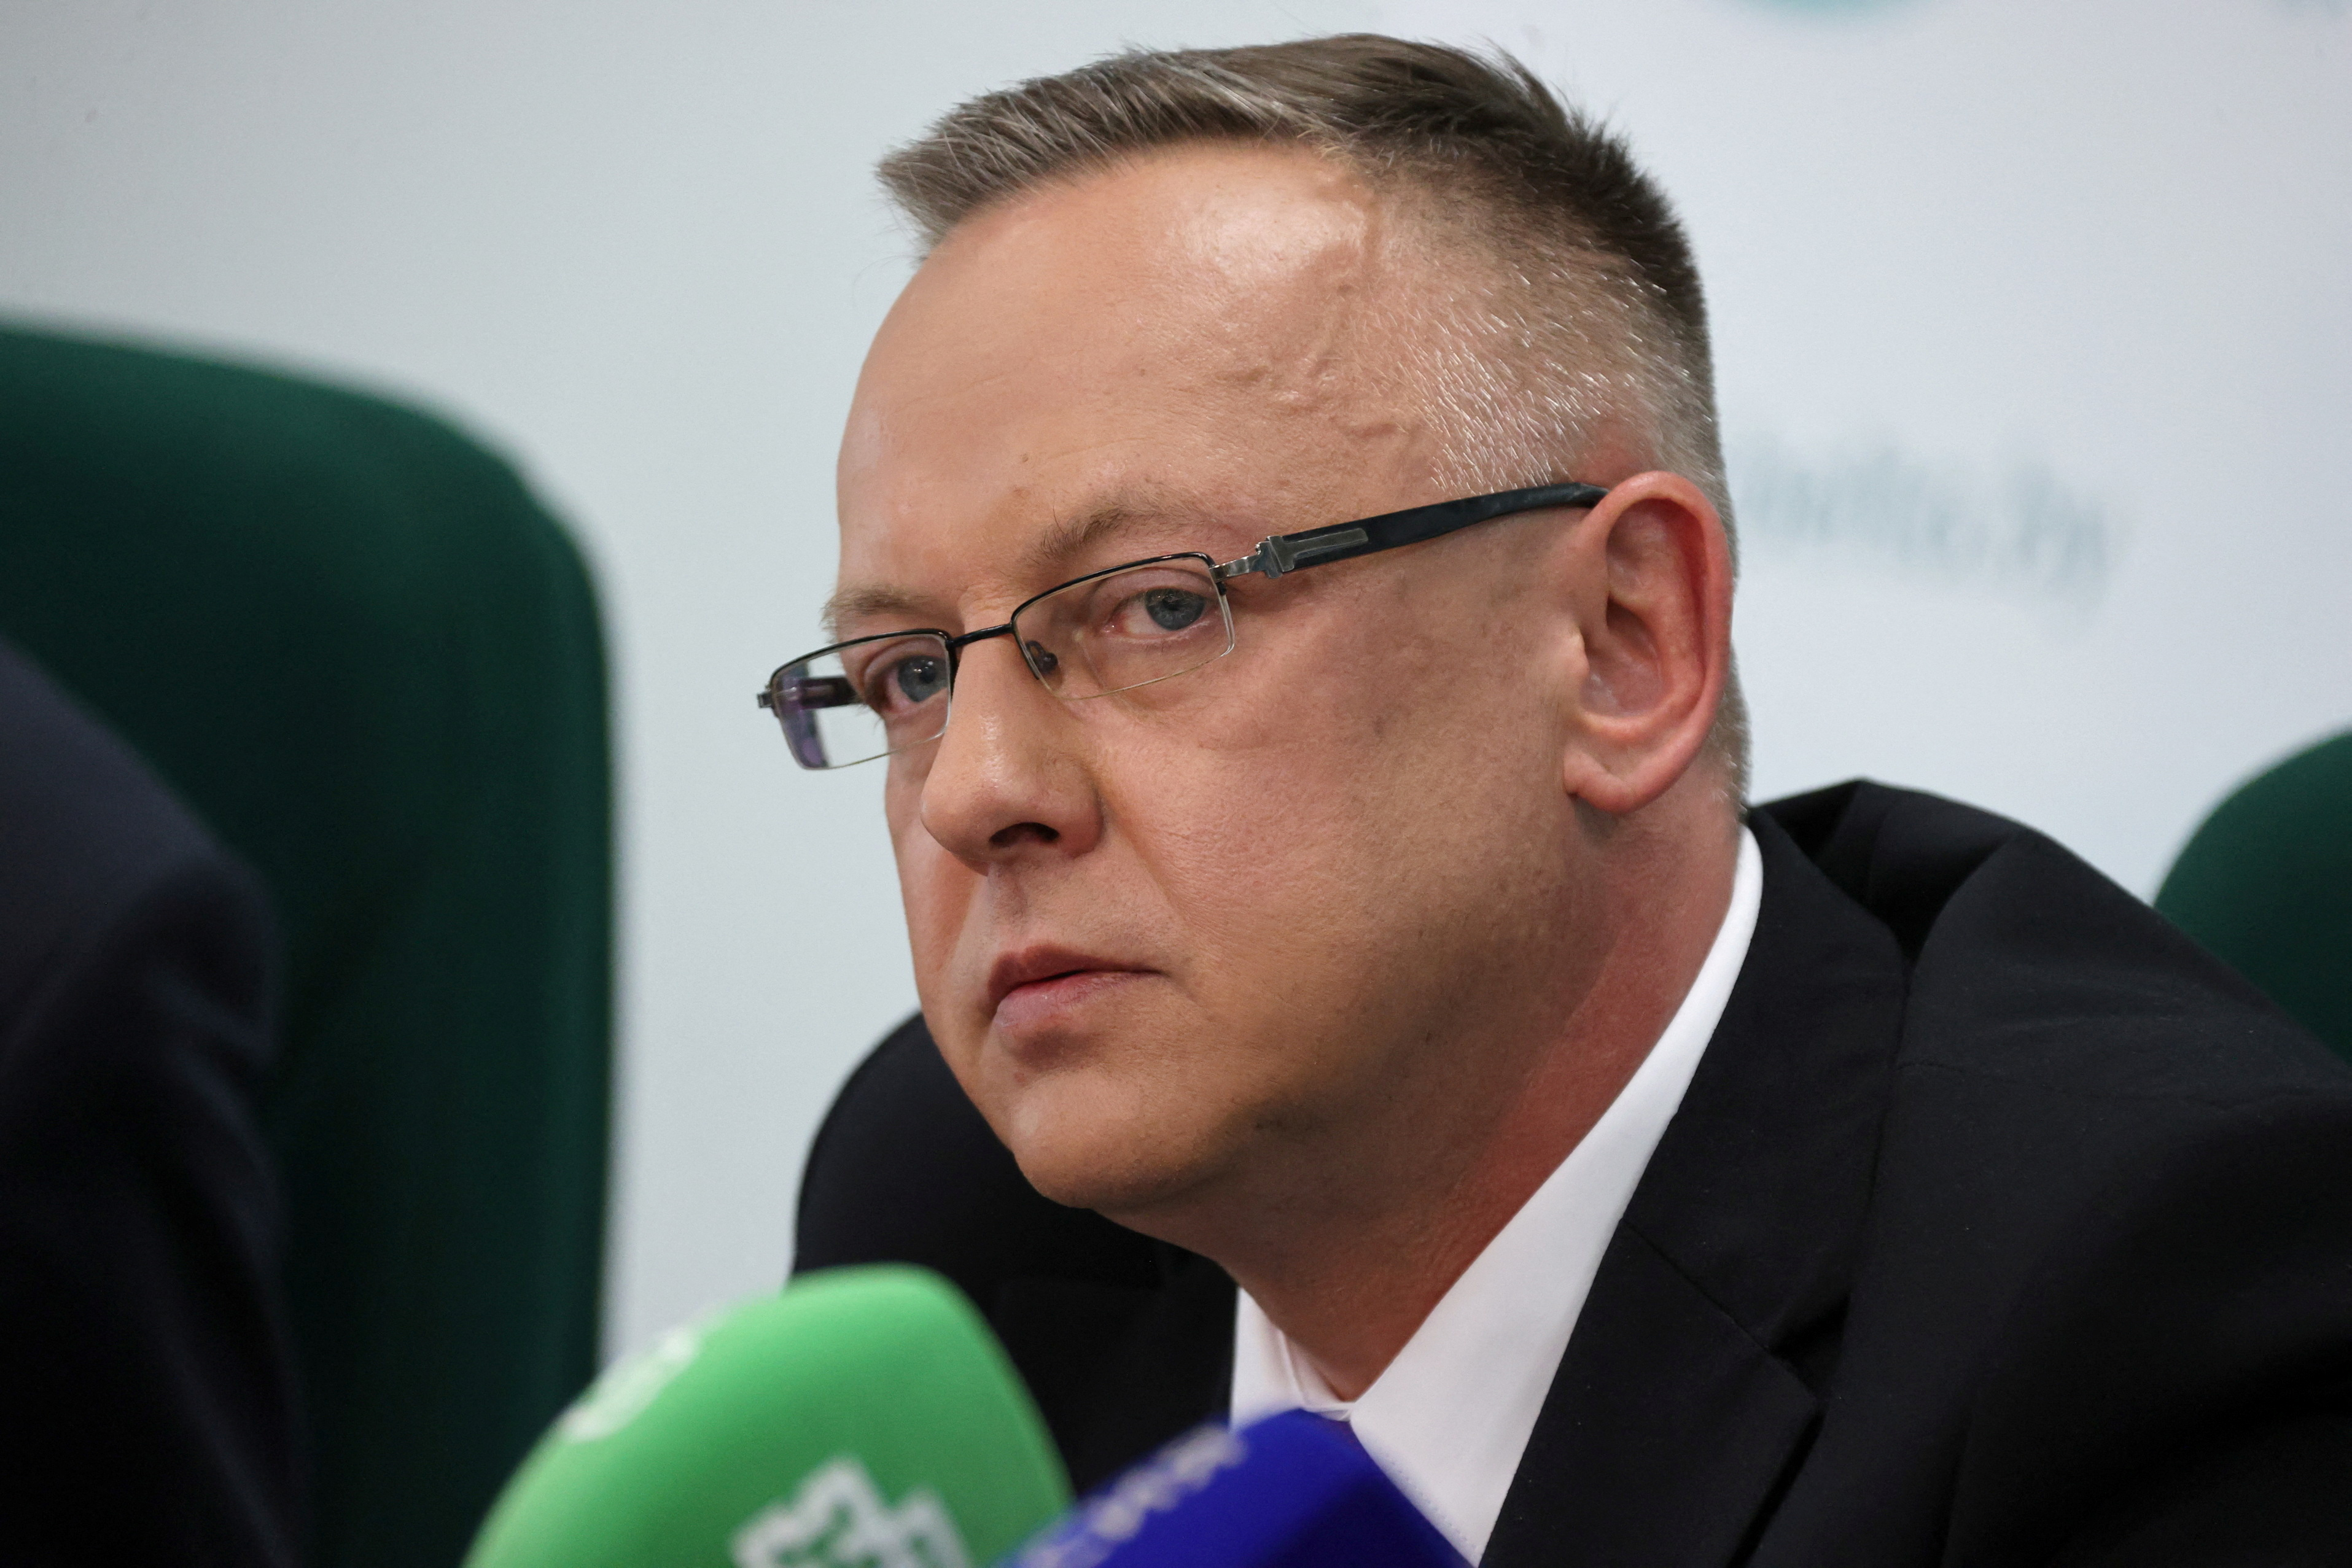 Tomasz Szmydt, a Polish judge who requested political asylum in Belarus, attends a press conference in Minsk